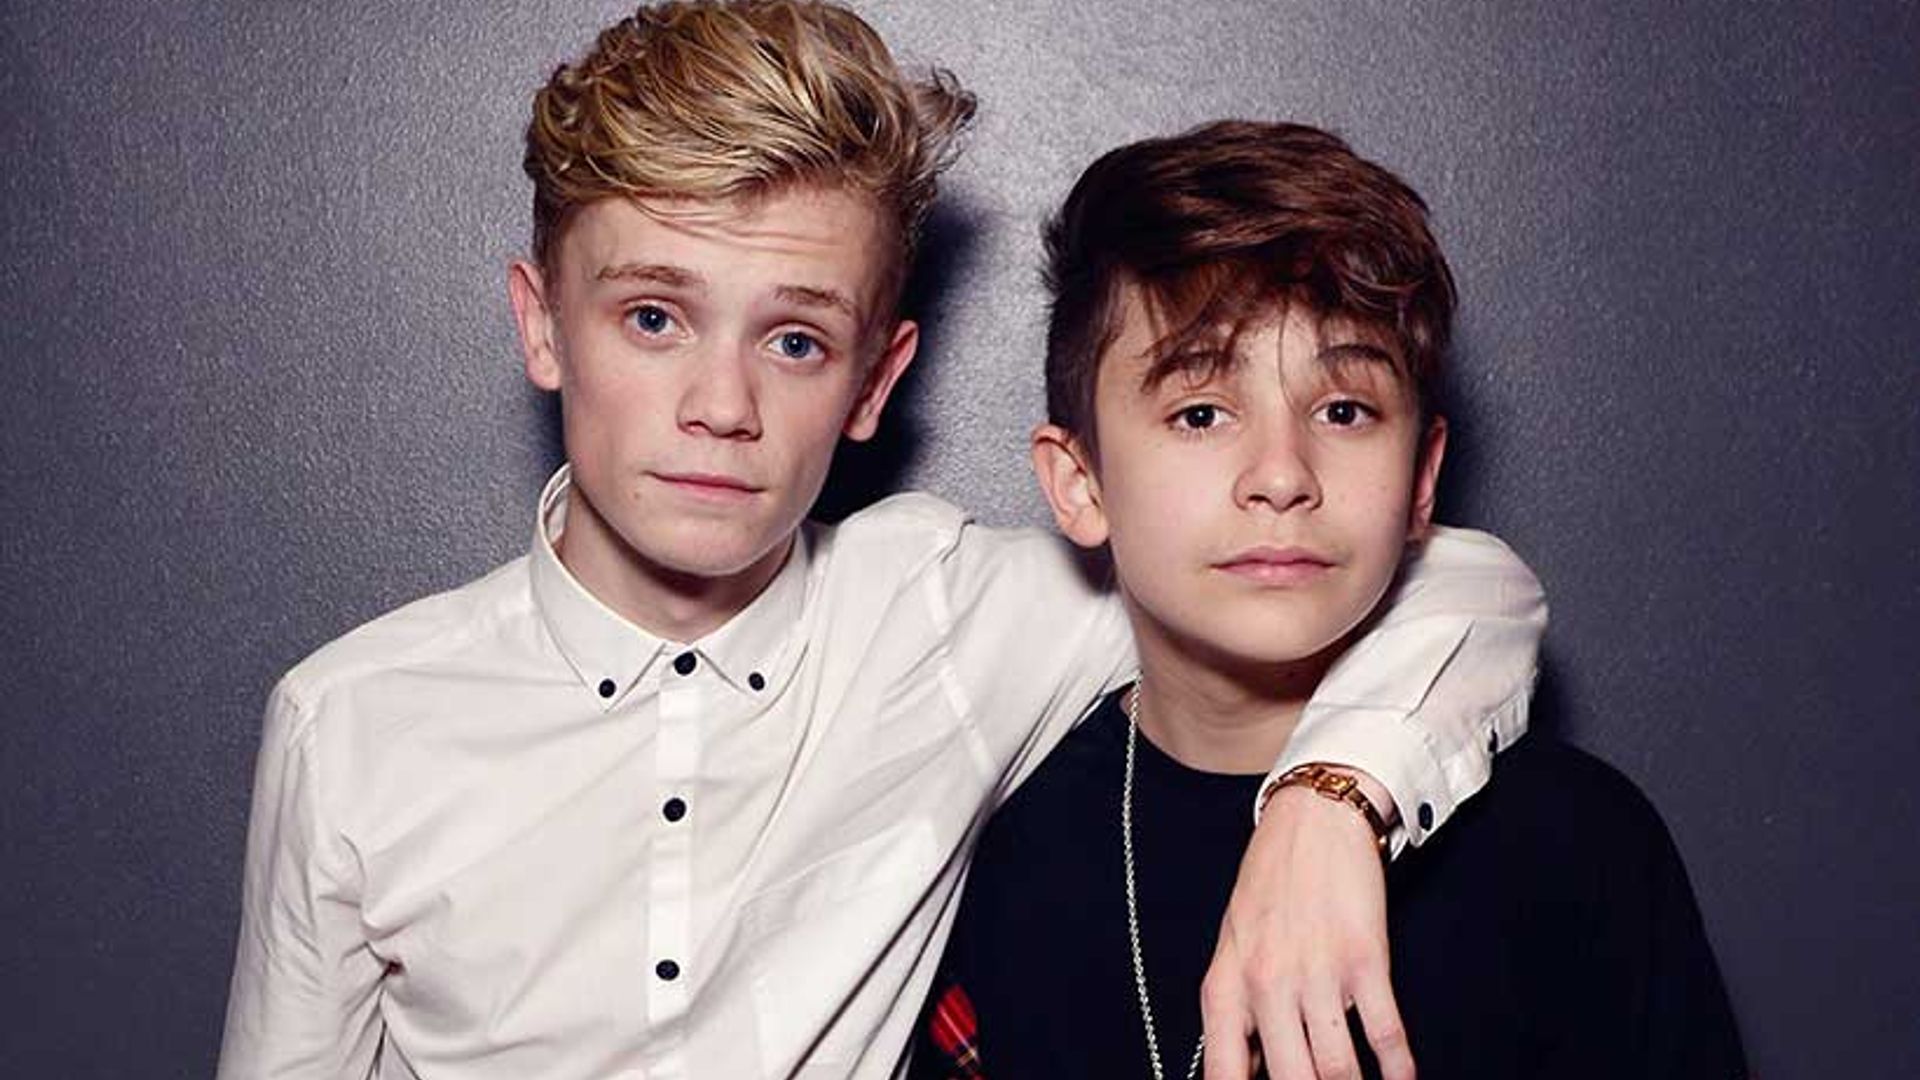 Britain's Got Talent's Bars and Melody look unrecognisable in Instagram  photo | HELLO!